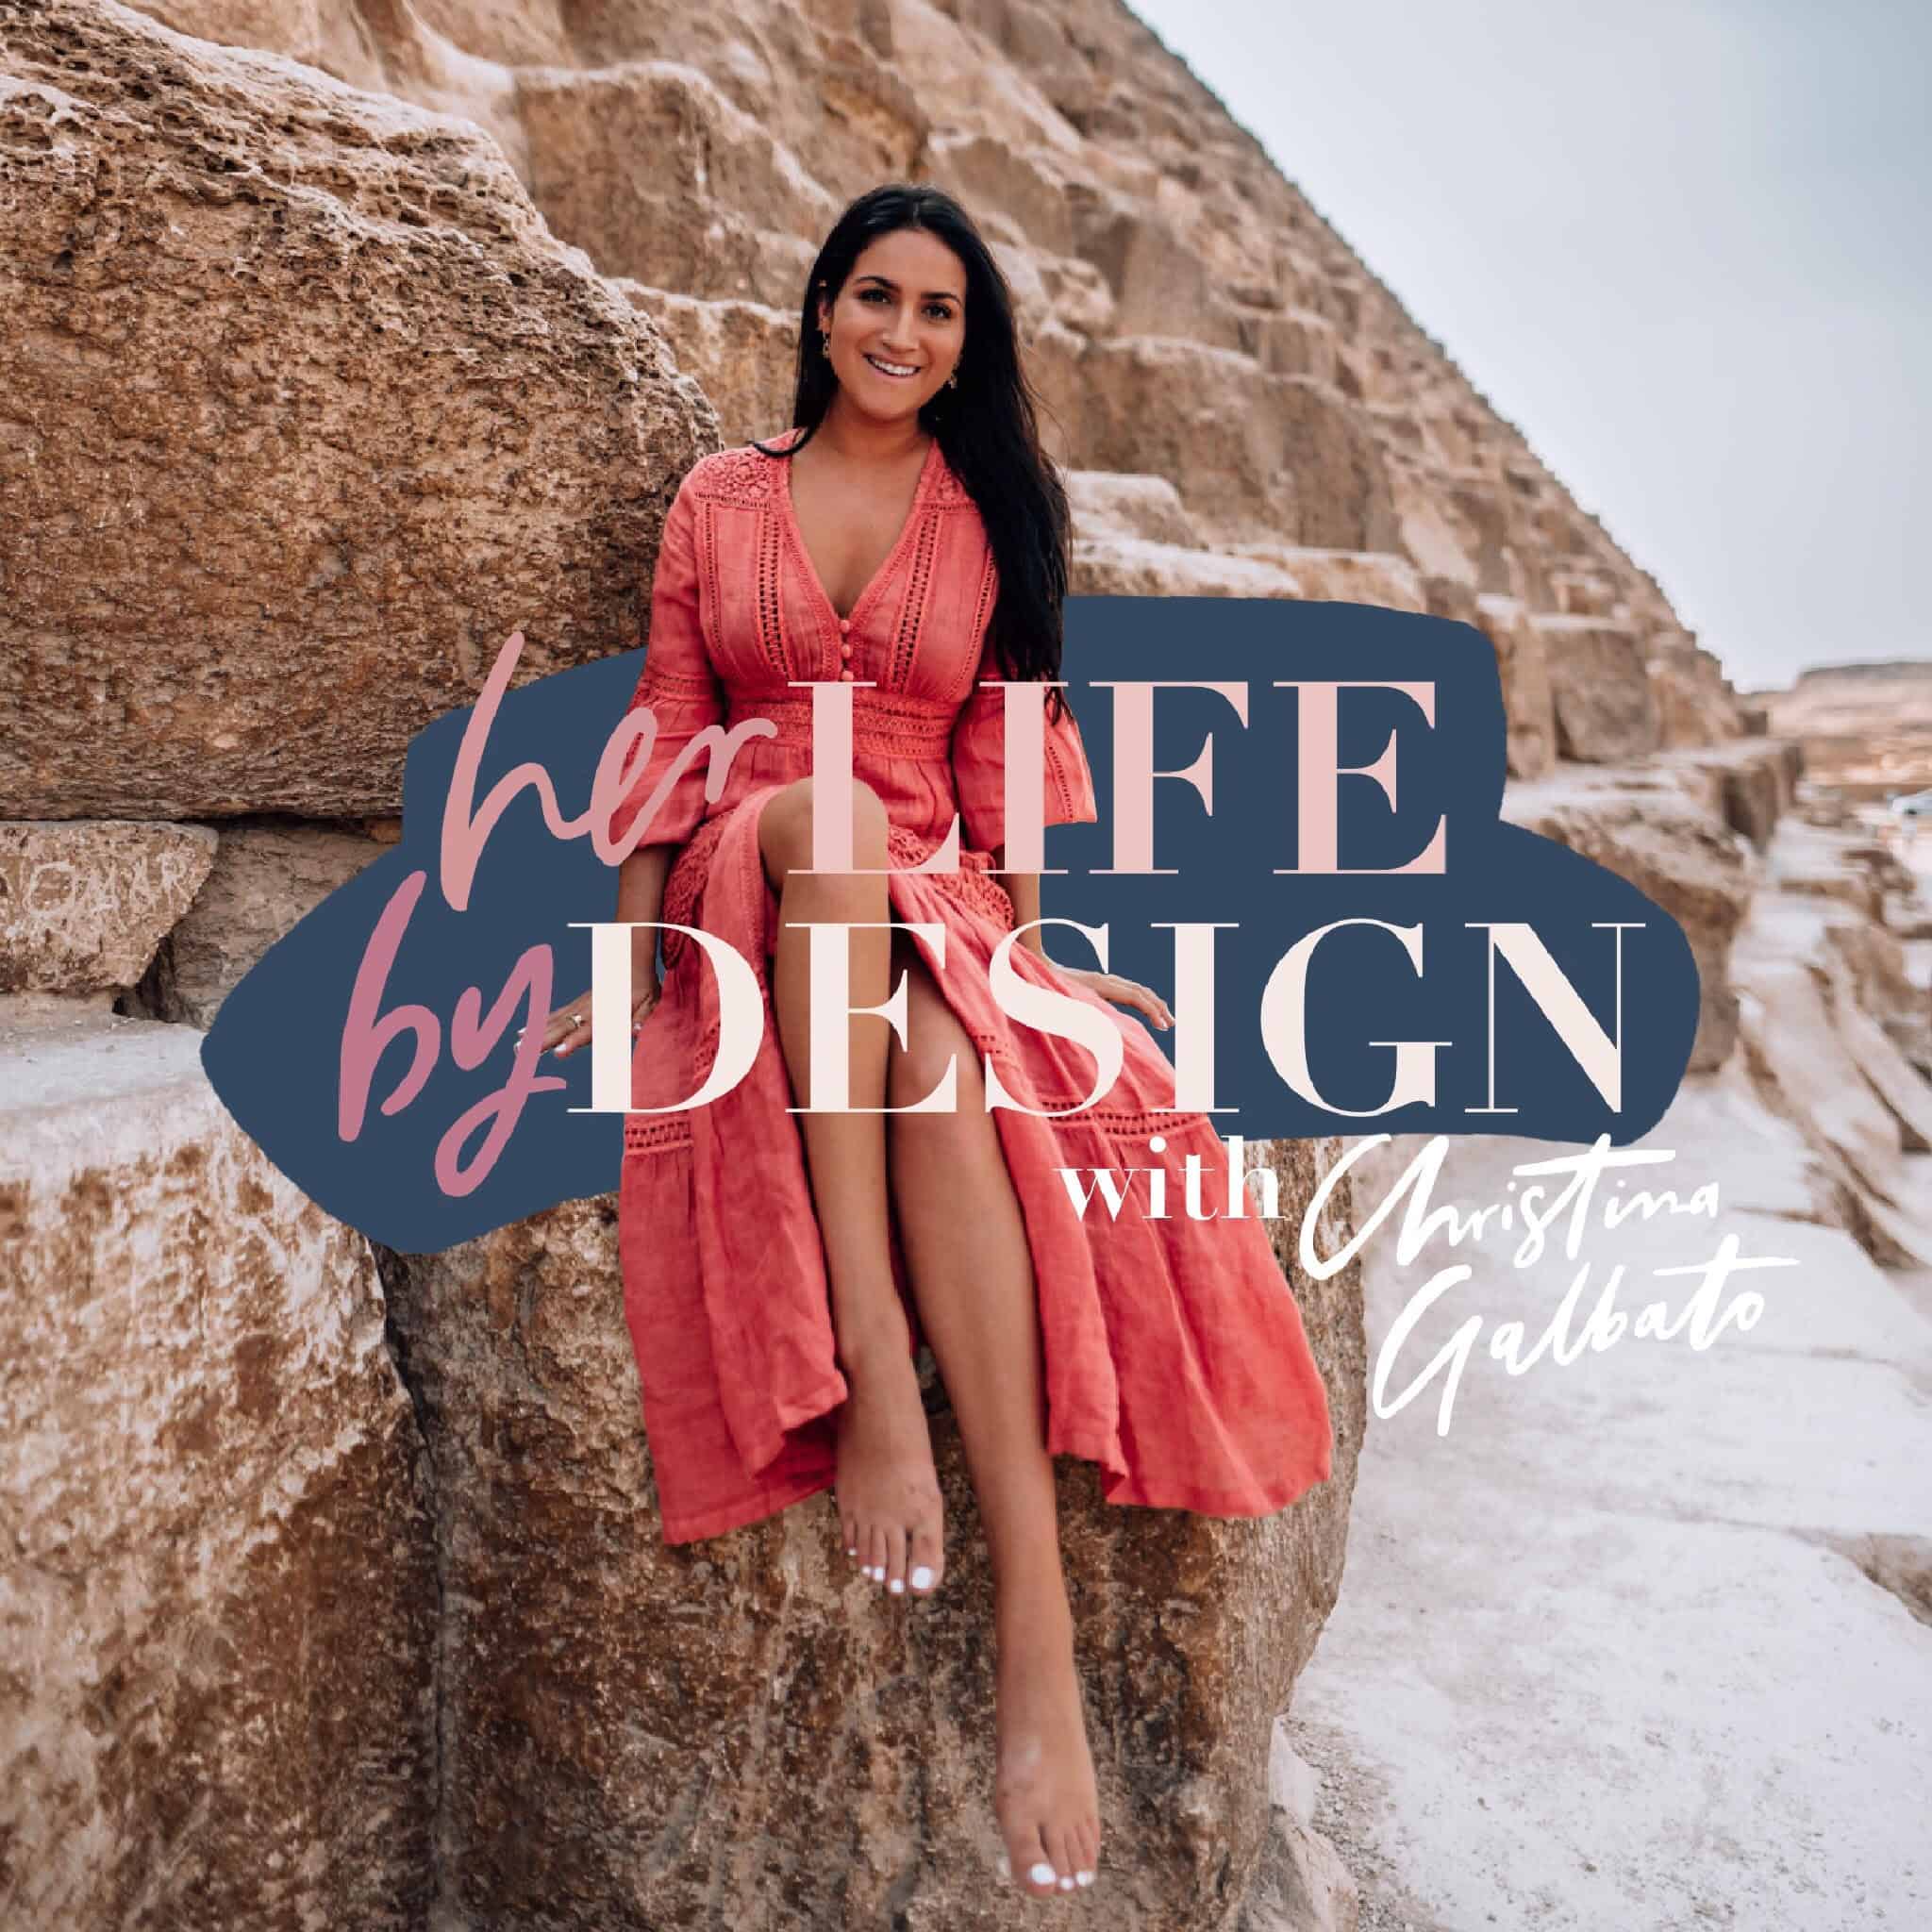 Her Life, By Design Podcast with Christina Galbato